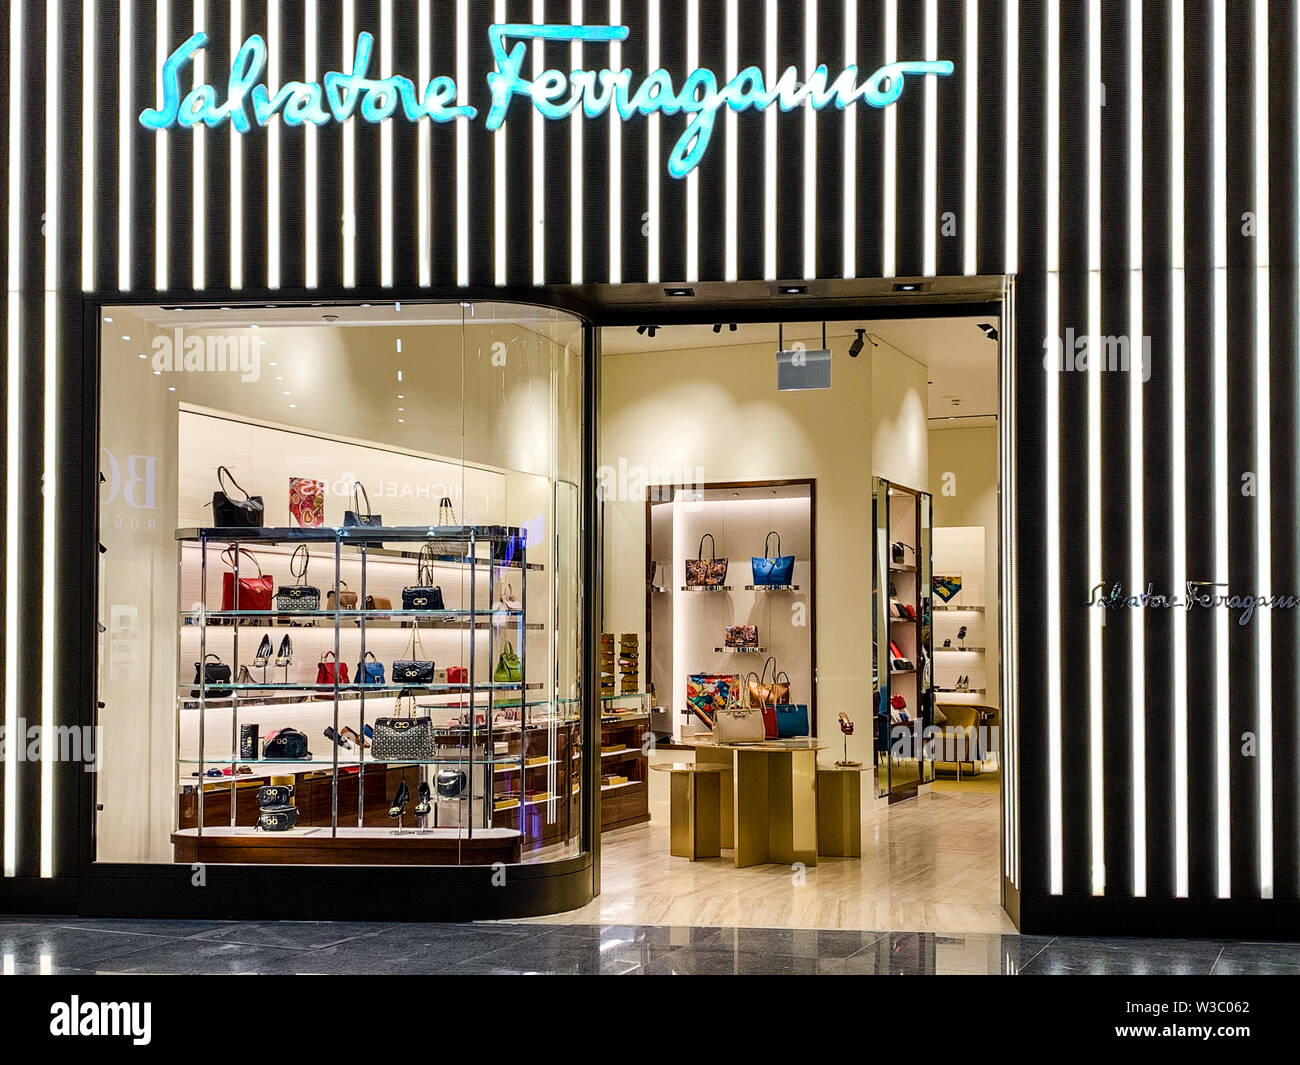 Italian Salvatore Ferragamo shop front, selling luxurious items. It is a  famous Italian high end retailer, especially for shoes. Istanbul/ Turkey -  Ap Stock Photo - Alamy